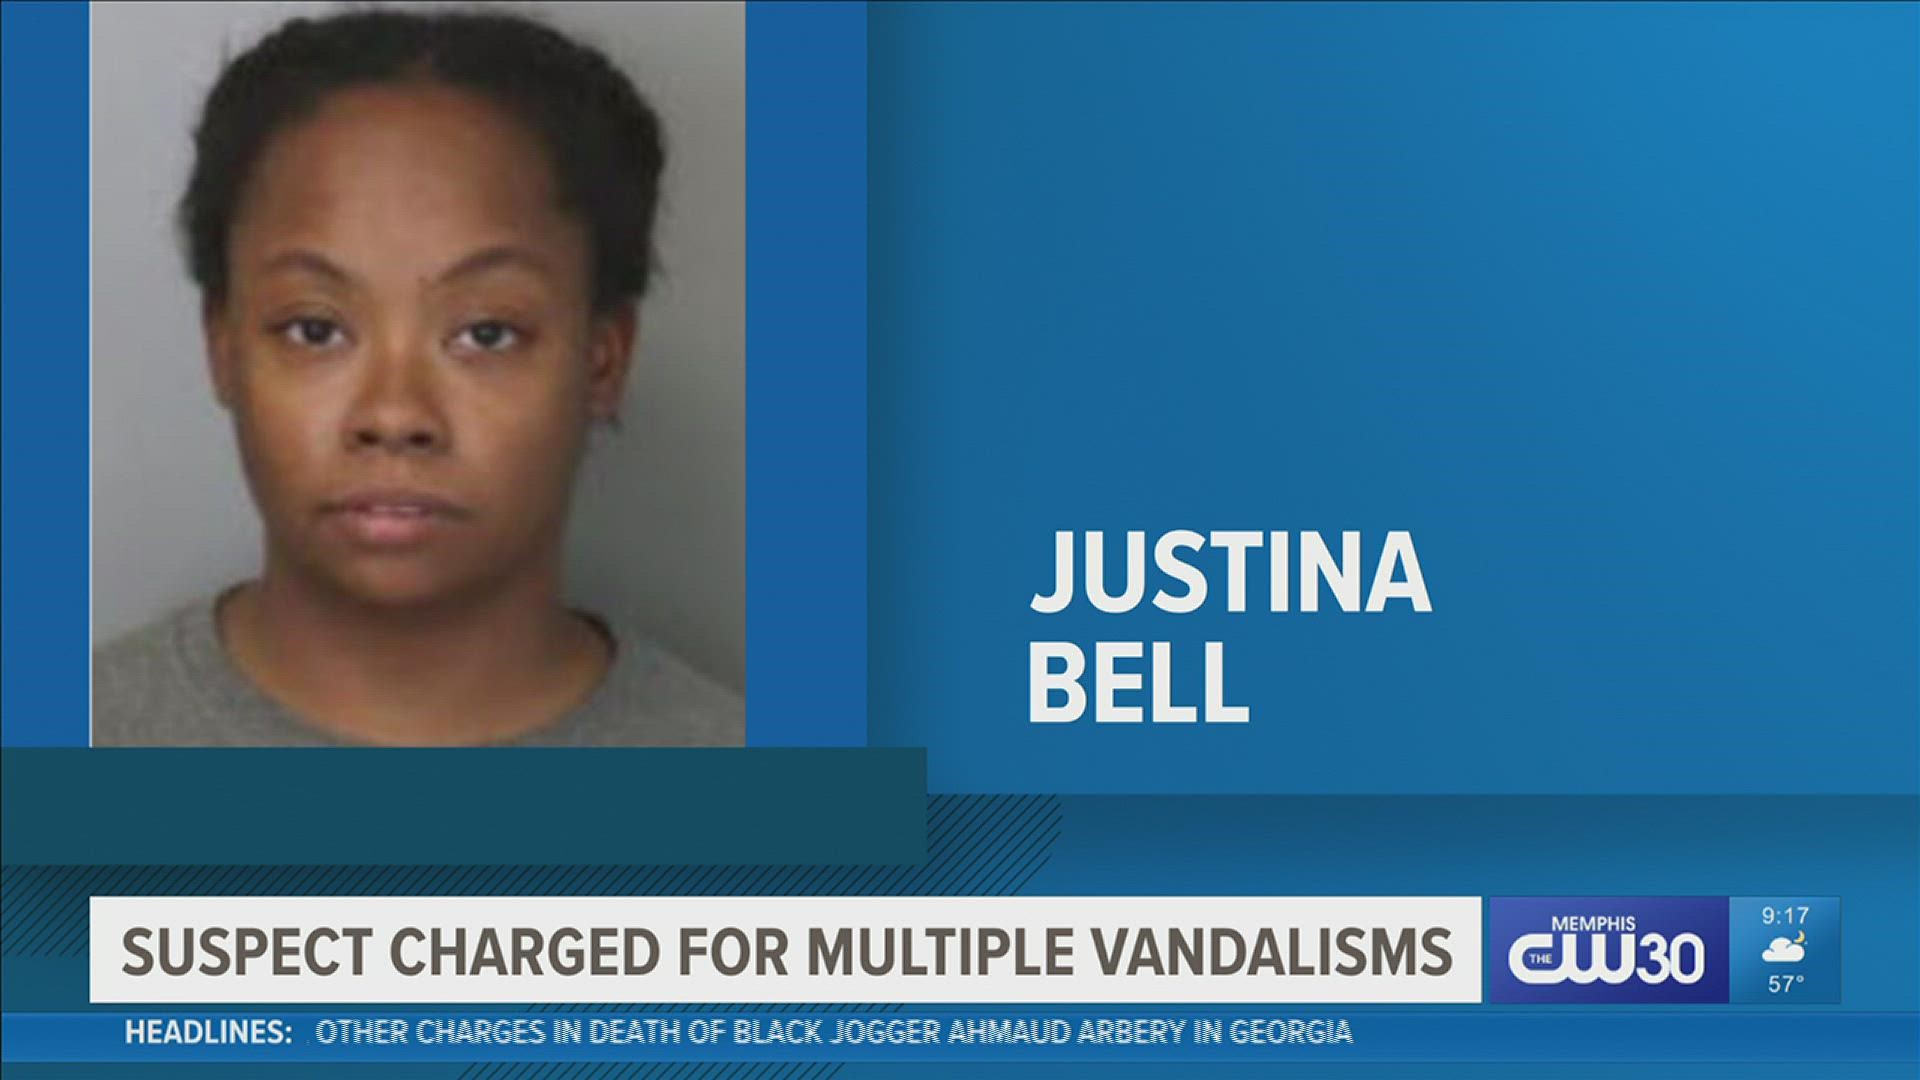 Justina Bell has been charged with Disorderly Conduct and Vandalism over $1,000.